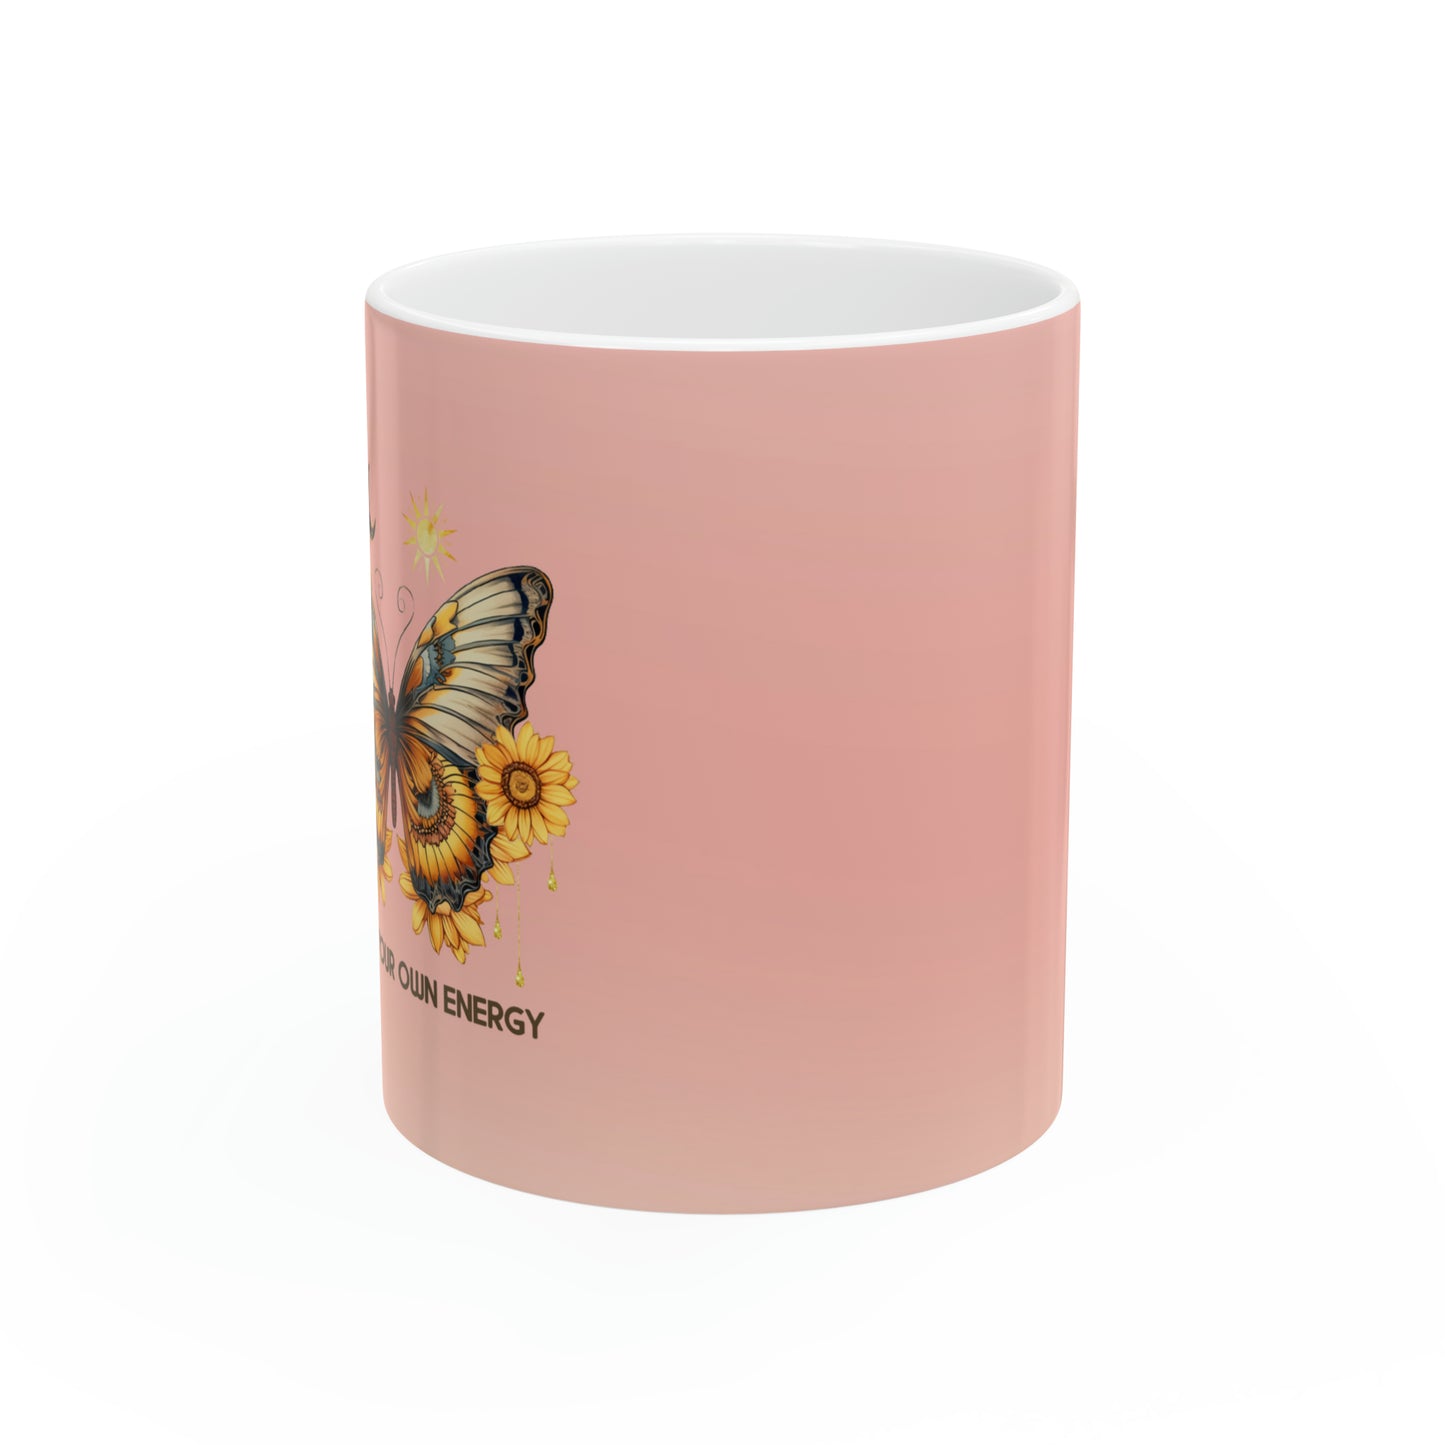 Stay In Your Own Energy - Spring Mug